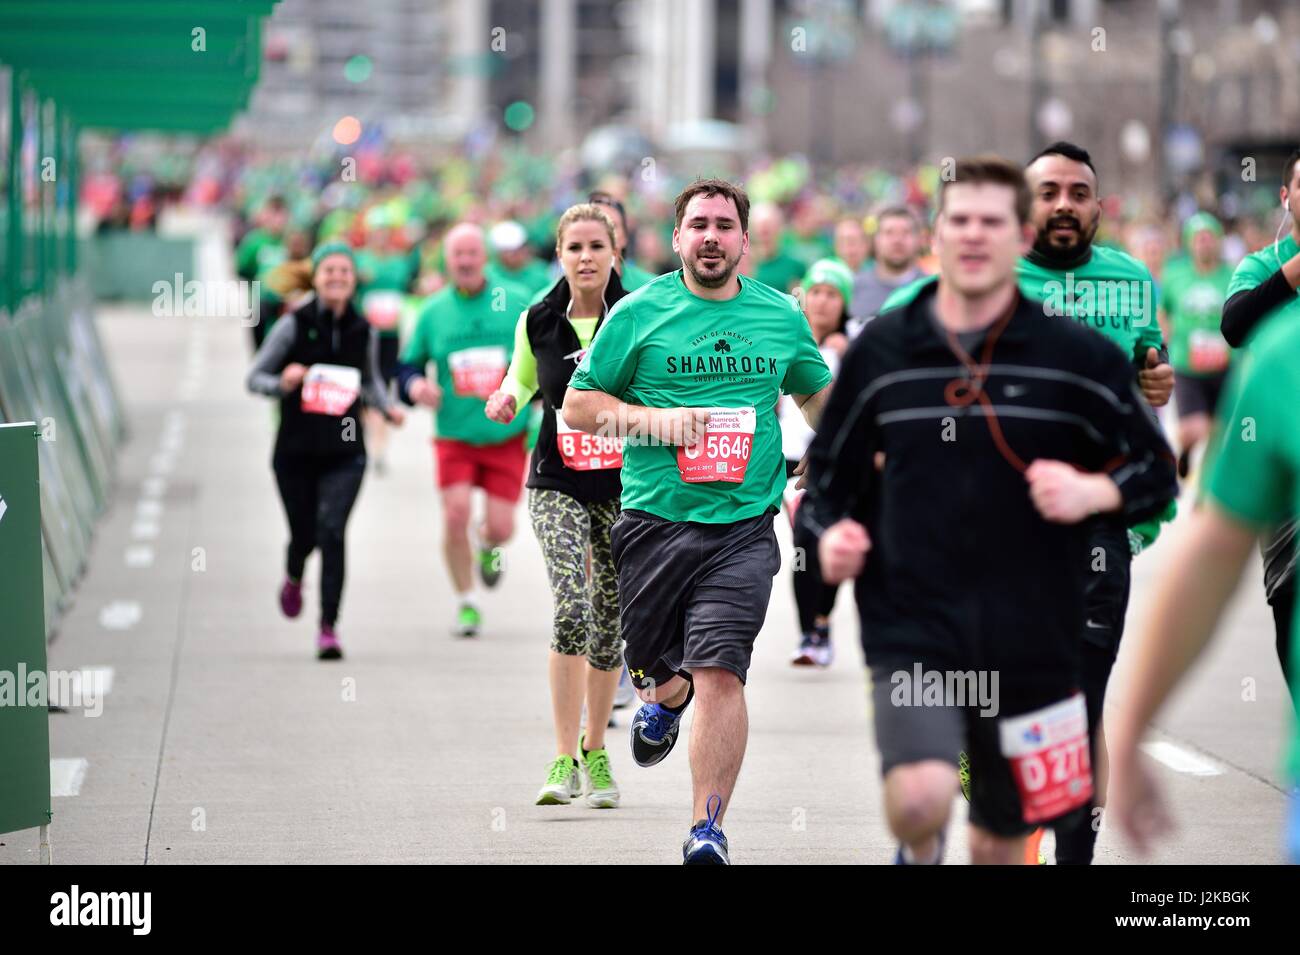 A sea of runners approachlng the finish line at the 2017 Shamrock Shuffle.  The annual race is an 8K route through downtown Chicago, Illinois, USA. Stock Photo